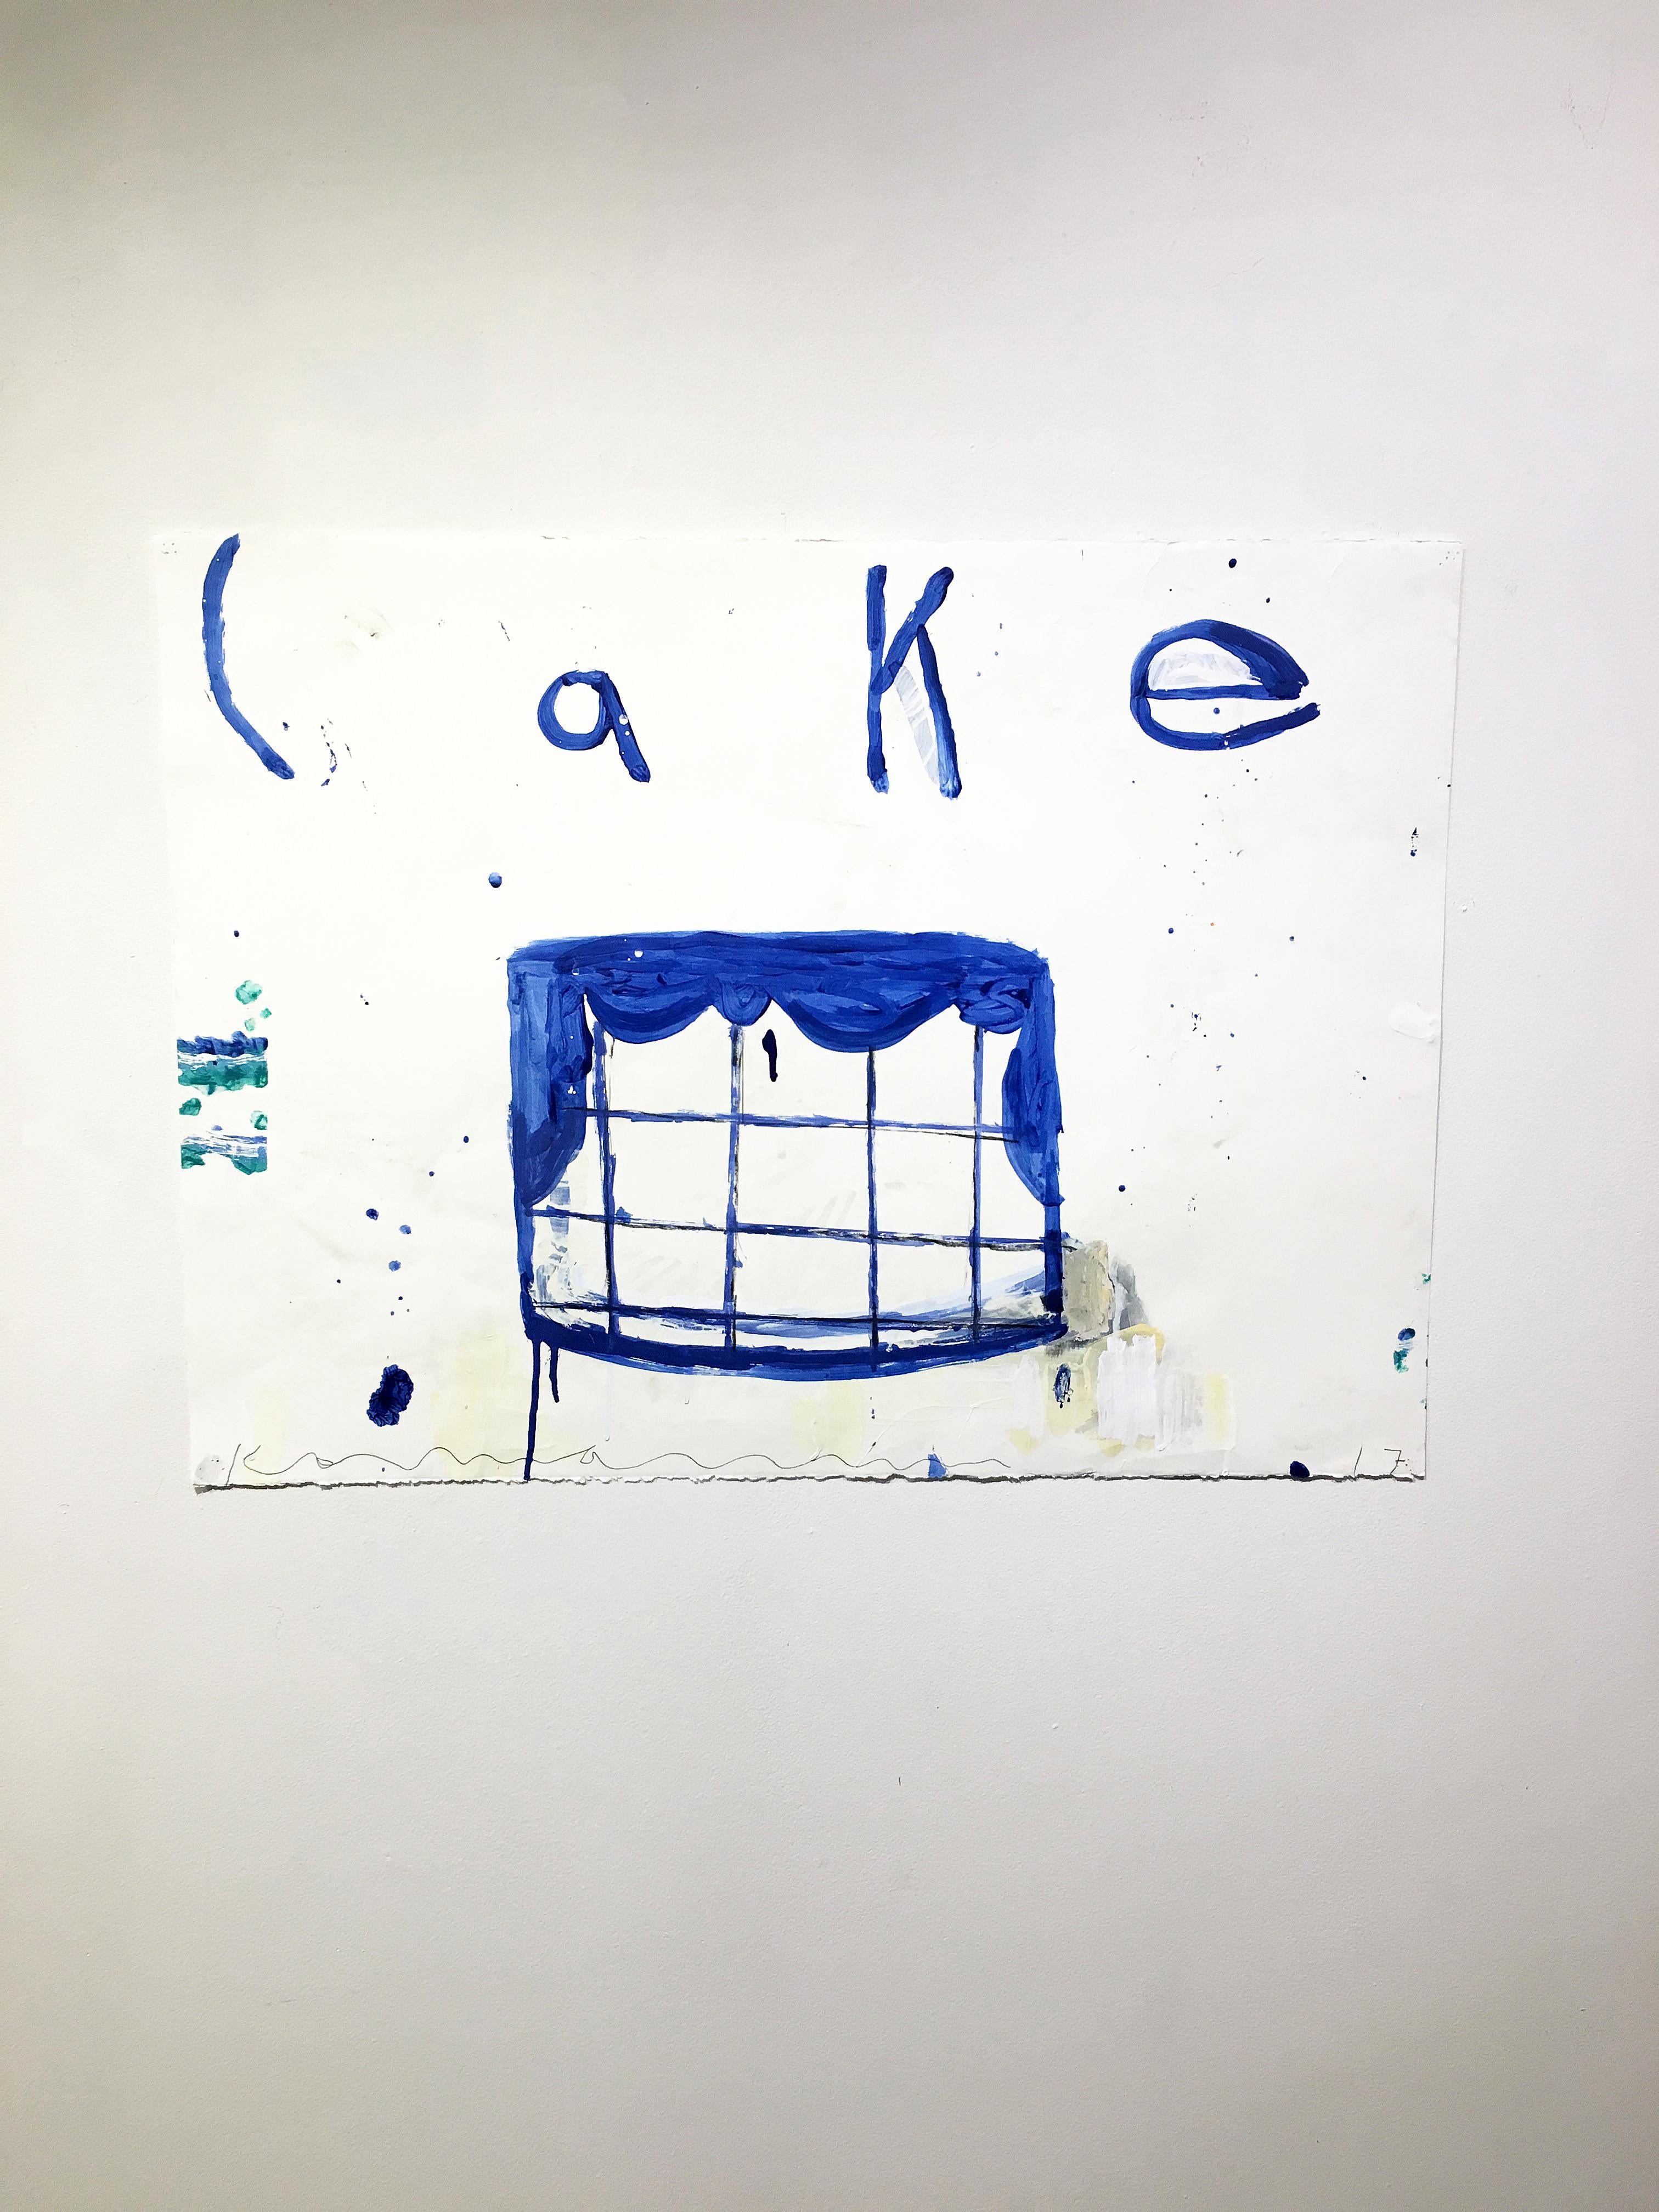 'Cake (White & Blue)' 2017 by American artist, Gary Komarin. Mixed media on paper, 22.25 x 30 in. Cakes are among Komarin’s most recognizable idiosyncratic images. This faux naive work on paper features a 1-tier cake painted in blue on a white